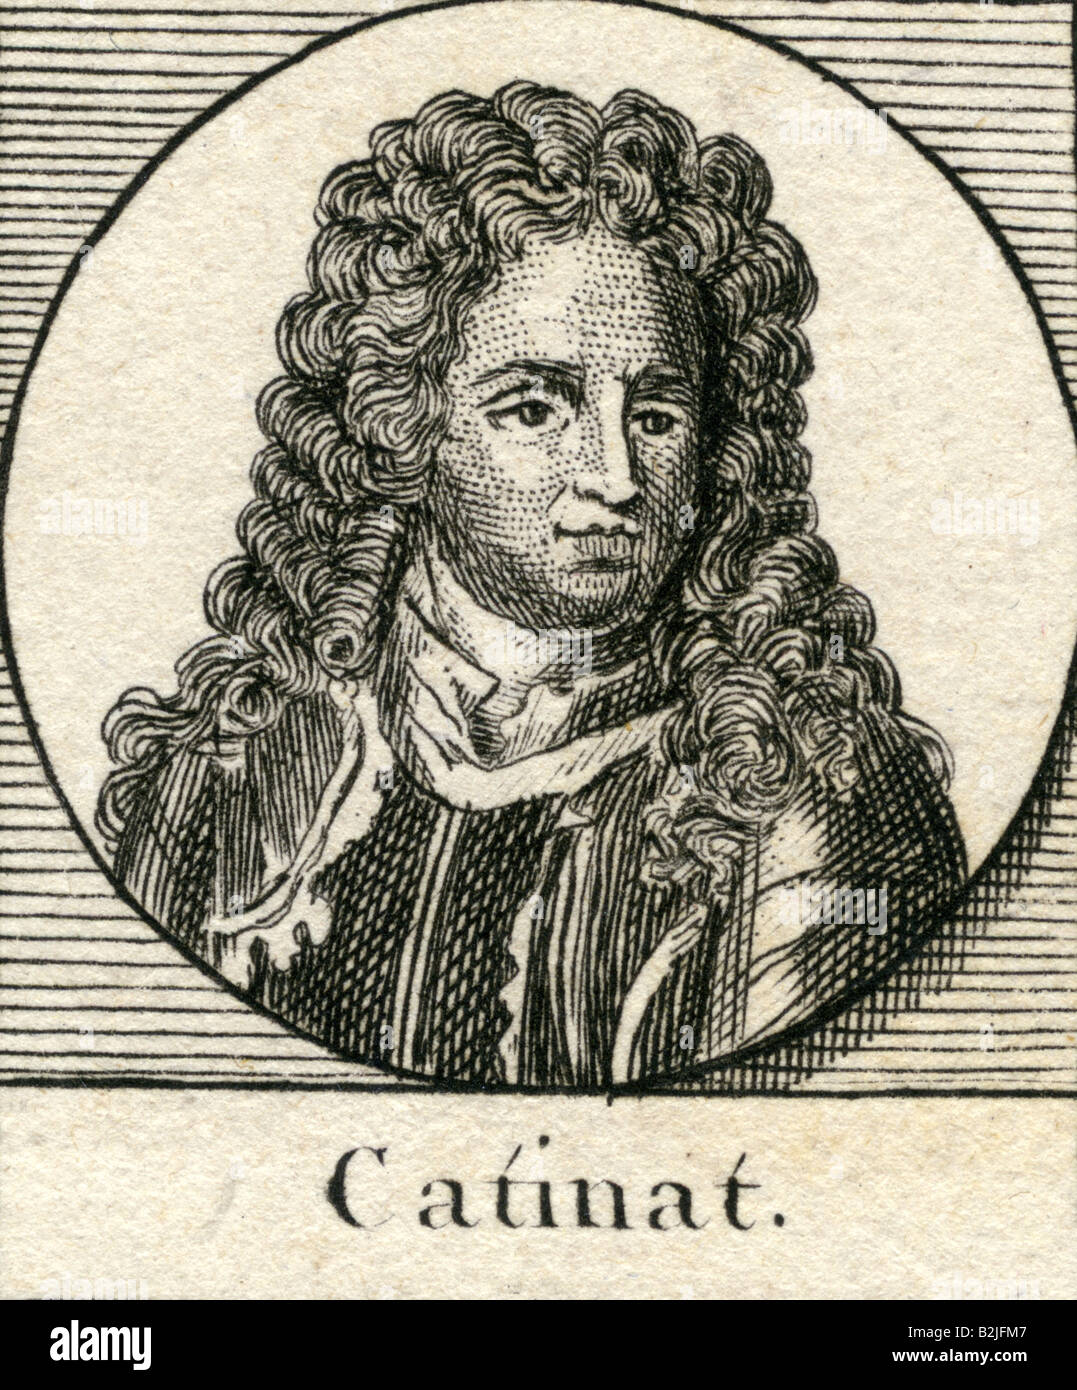 Catinat de La Fauconnerie, Nicolas III, 1.9.1637 - 25.2.1712, French General, portrait, copper engraving, late 17th century, , Artist's Copyright has not to be cleared Stock Photo